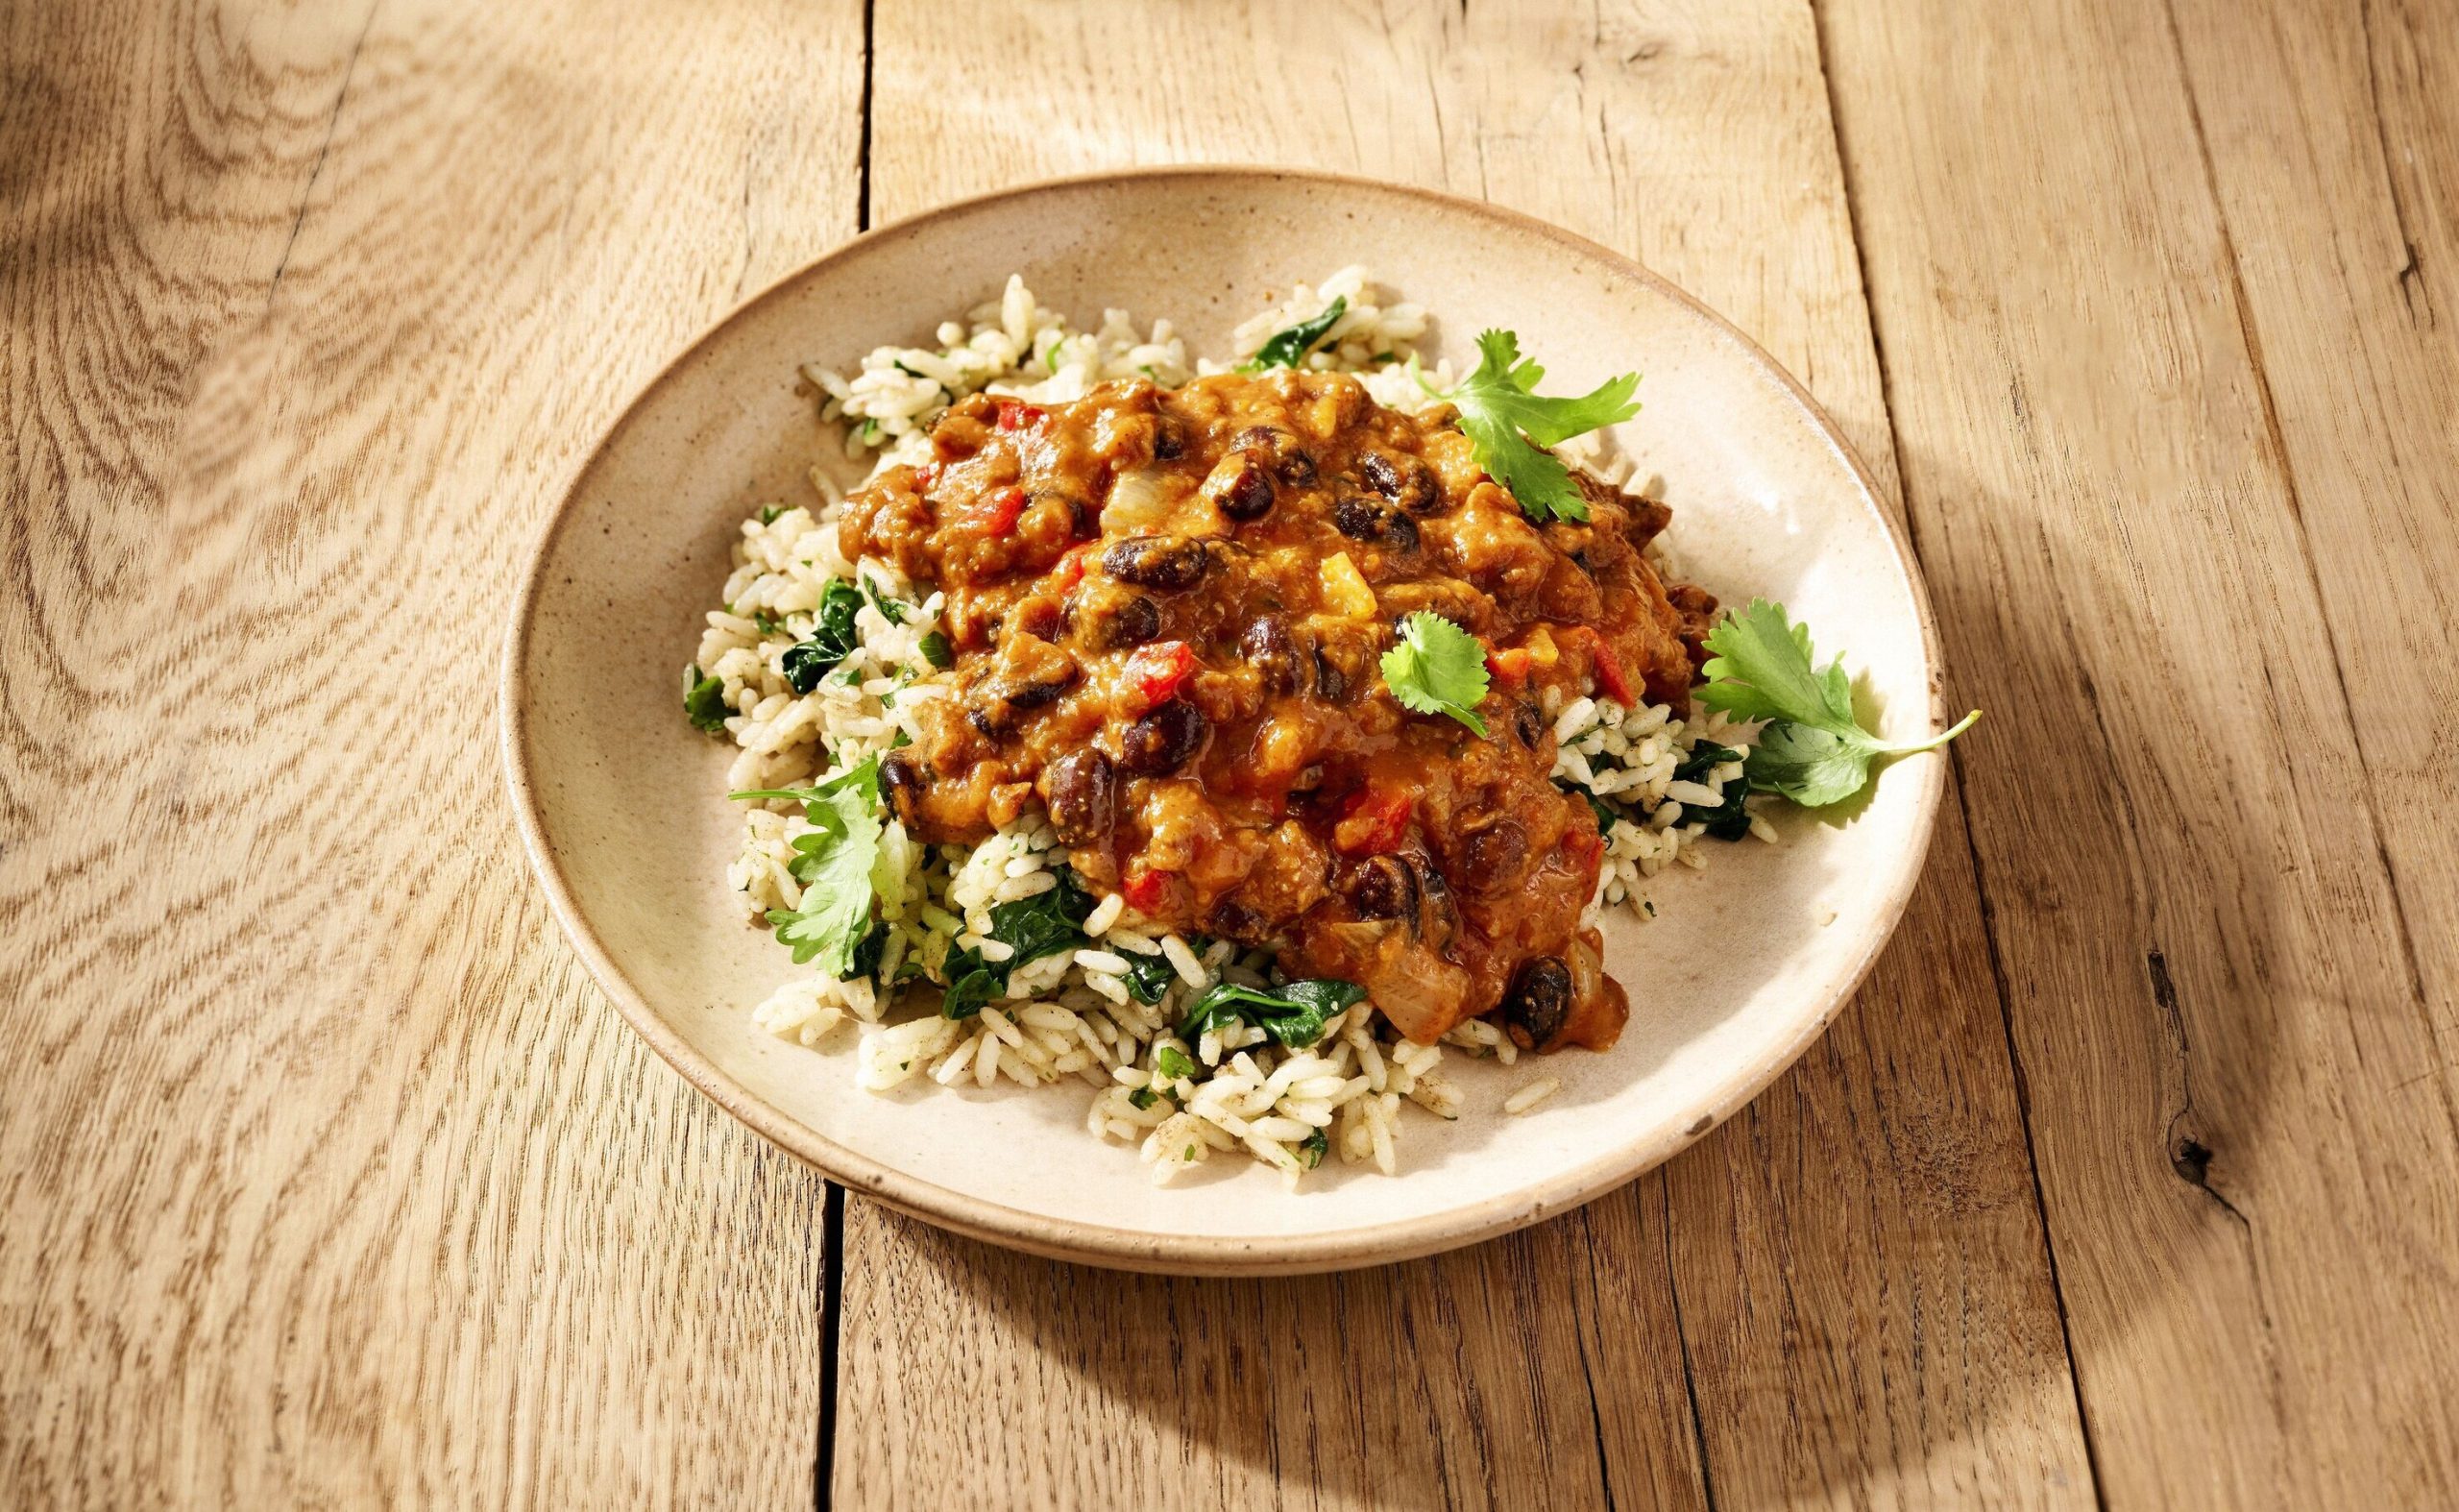 www.znewsservice.com beyond meat launches plant based ready meals range in the uk beyond meals chili with coriander rice scaled